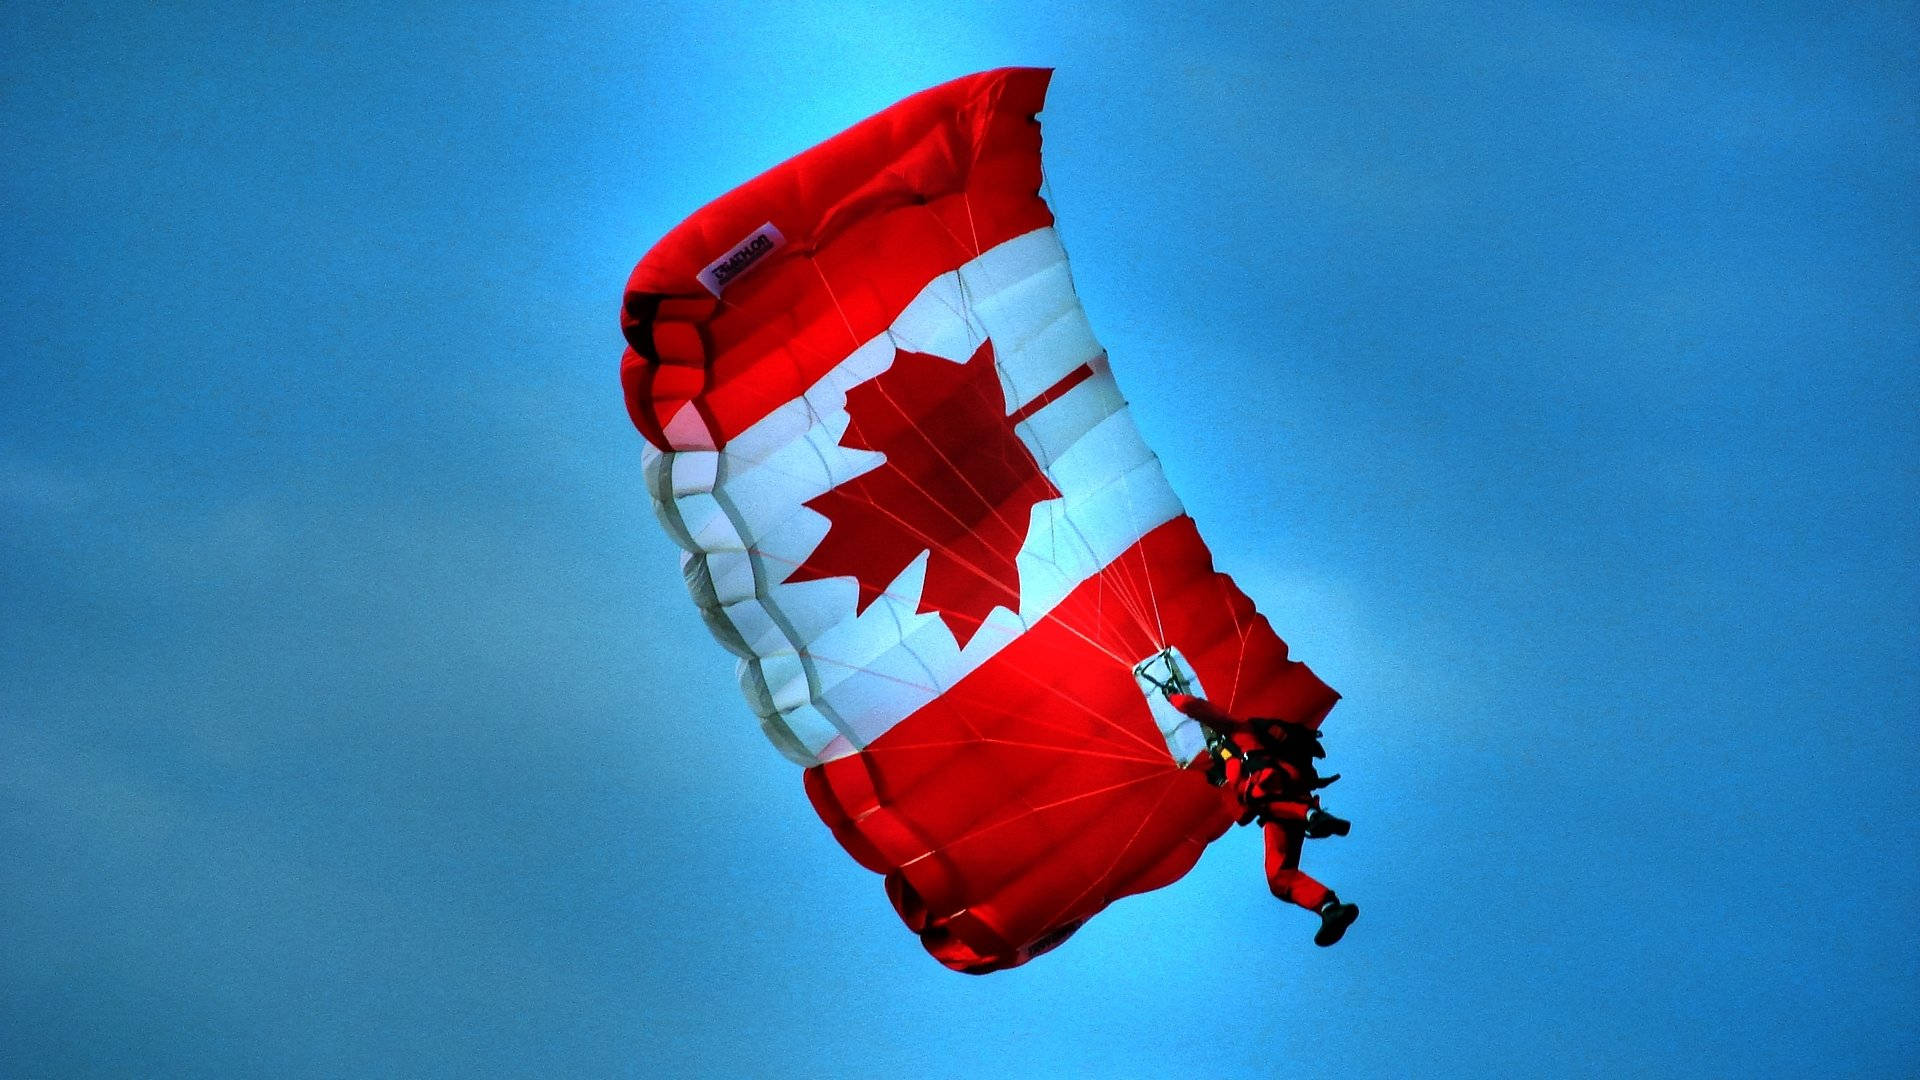 Majestic Shot Of Canada Flag Floating On A Parachute Against The Blue Sky